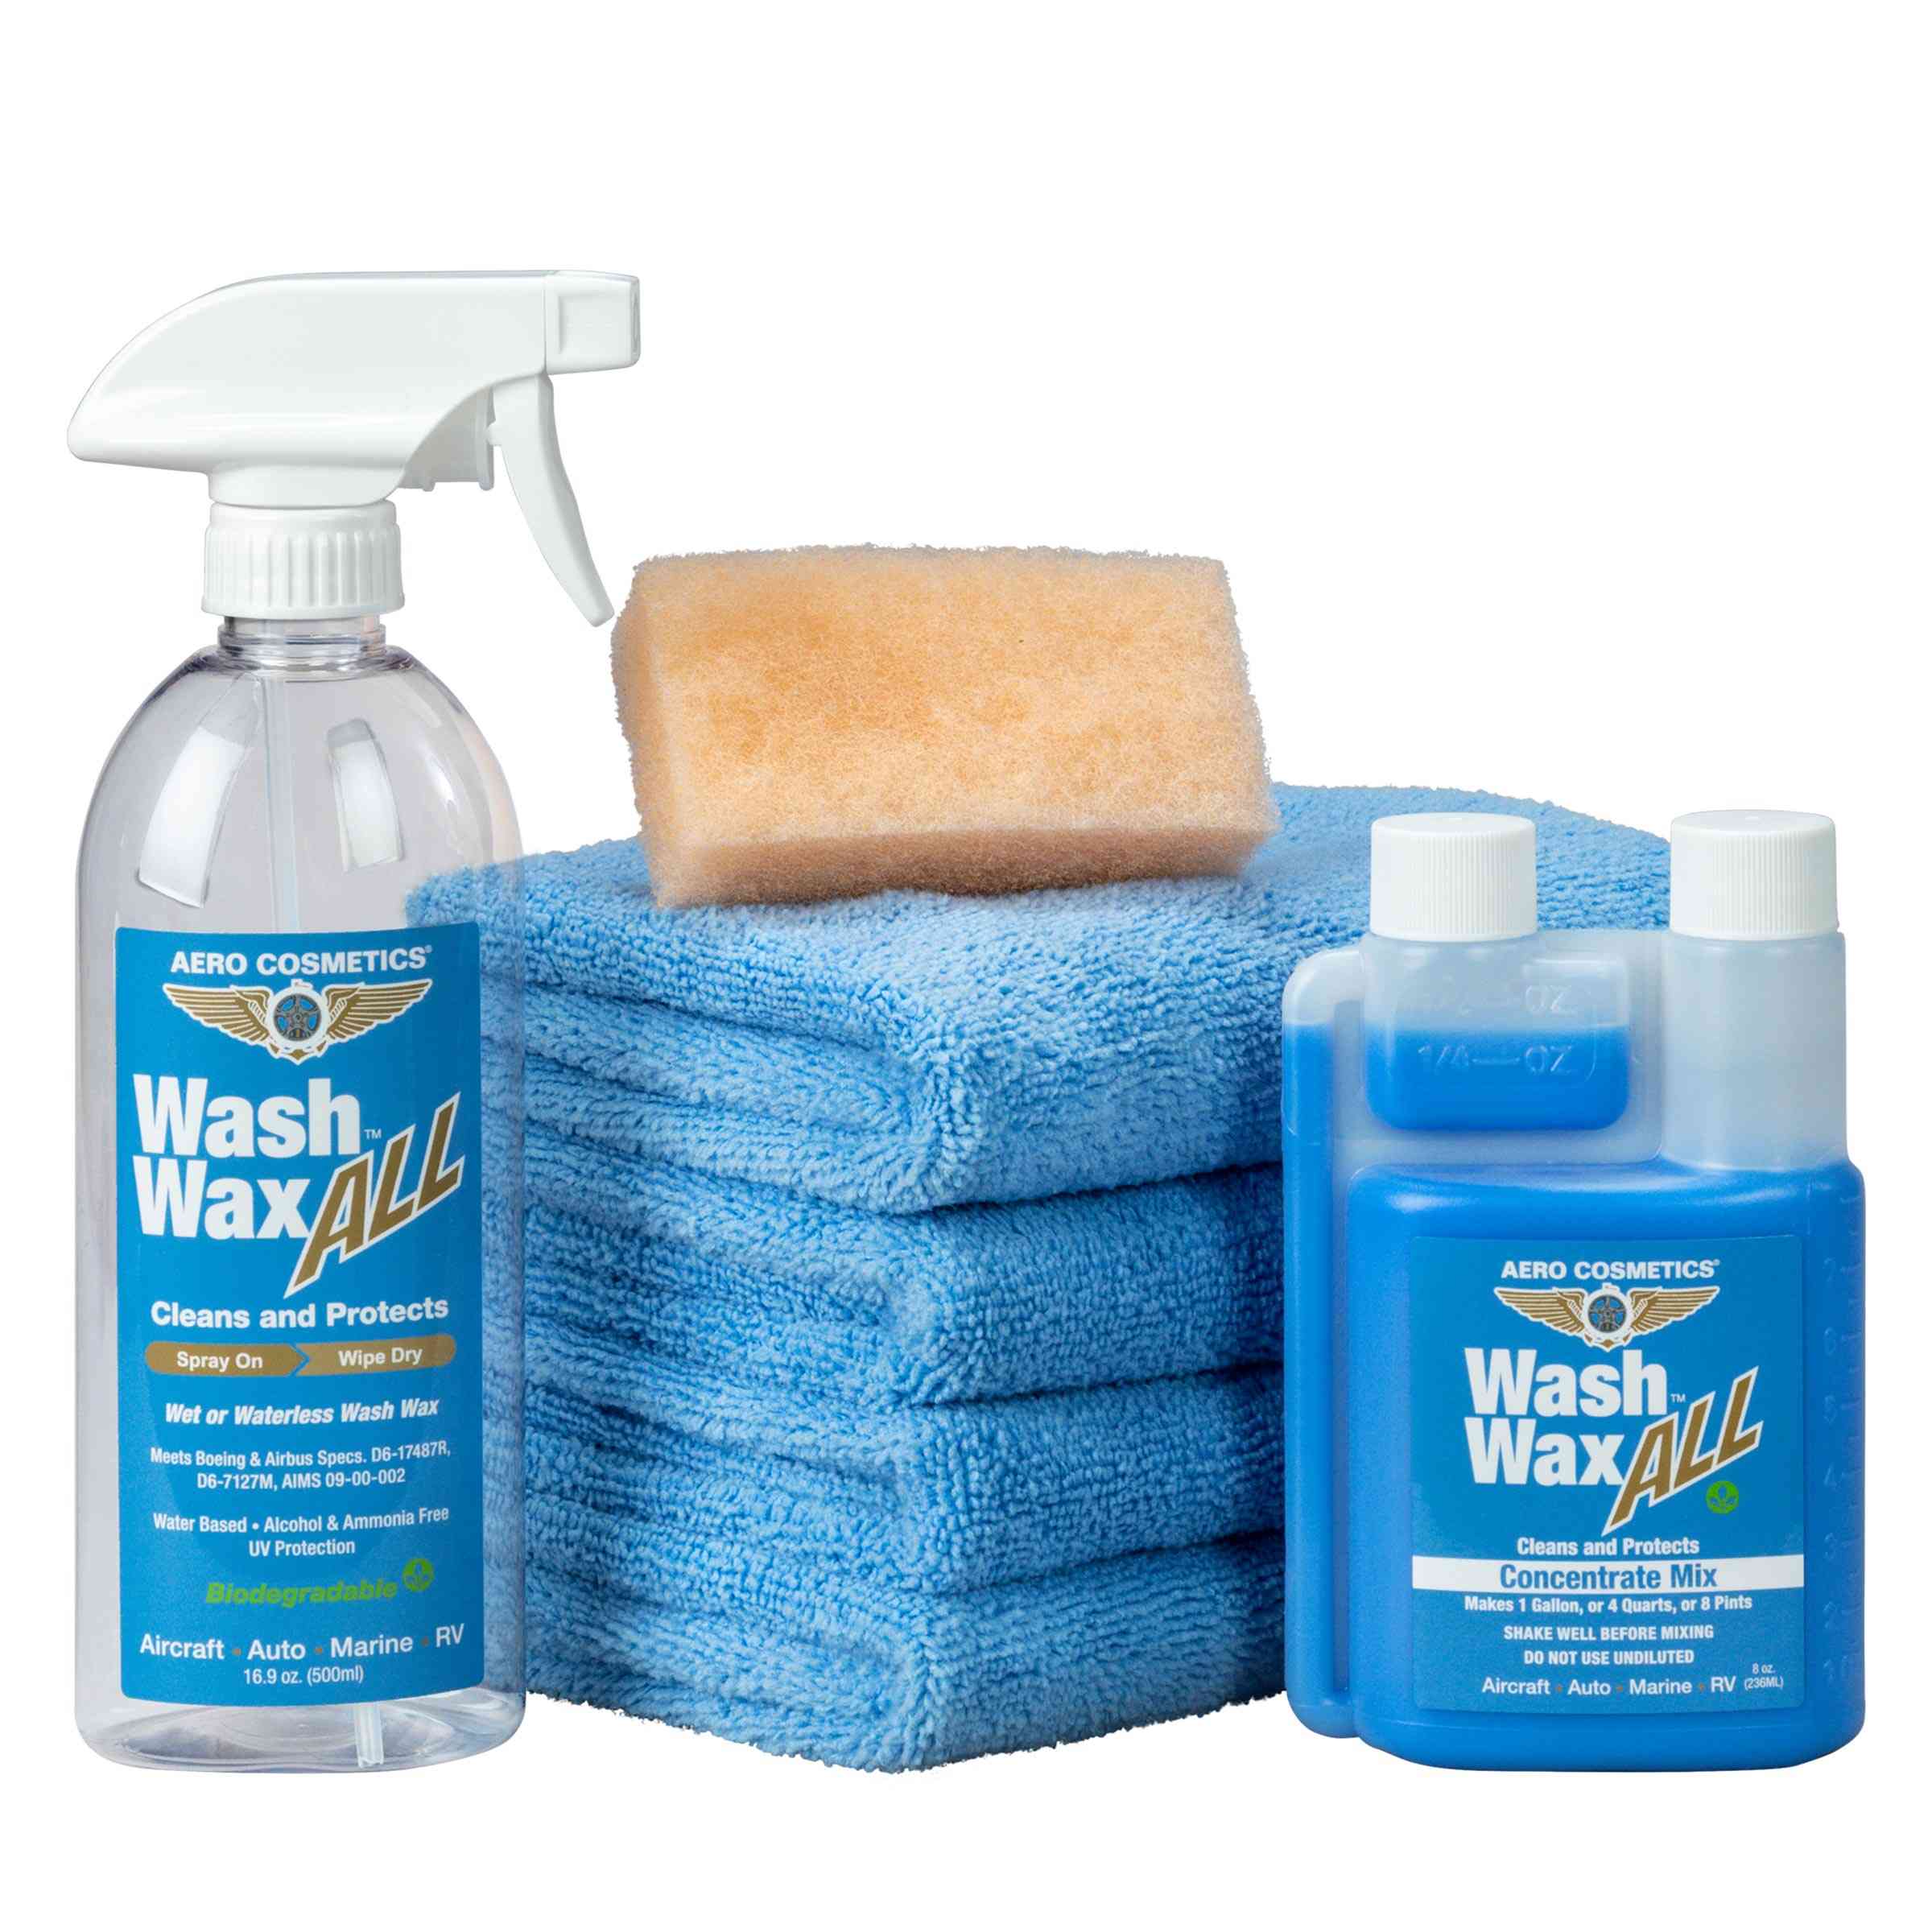 Aero Cosmetics Wash Wax All 8 fl. oz [Makes 1 gallon] Concentrate Kit - Waterless Wash Cleaner and Protectant